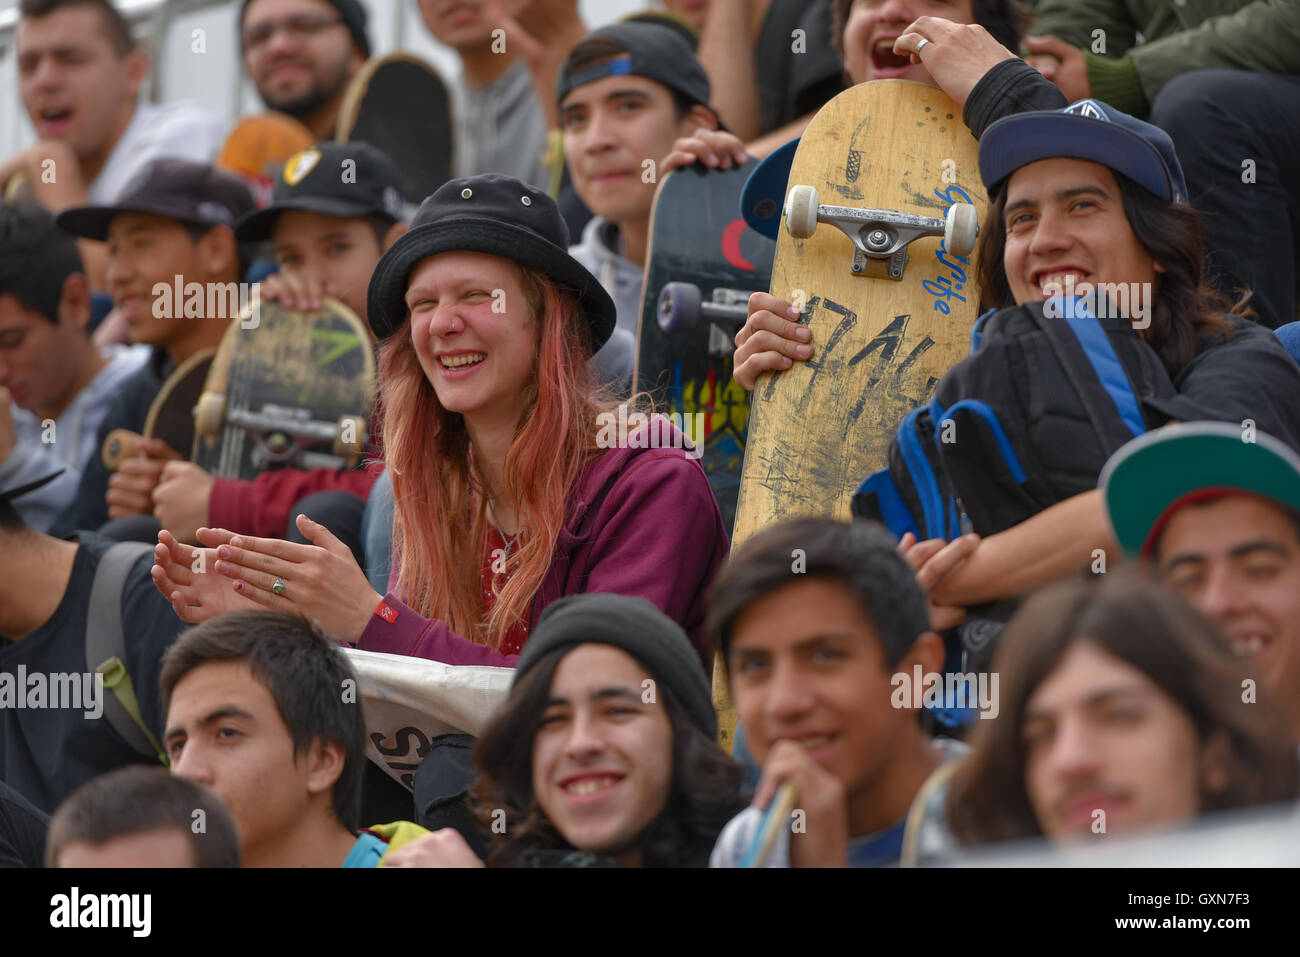 Buenos Aires, Argentina. 16 Sept, 2016. Emerica skateboard team demo at Tecnopolis in Buenos Aires, Argentina. Credit:  Anton Velikzhanin/Alamy Live News Stock Photo